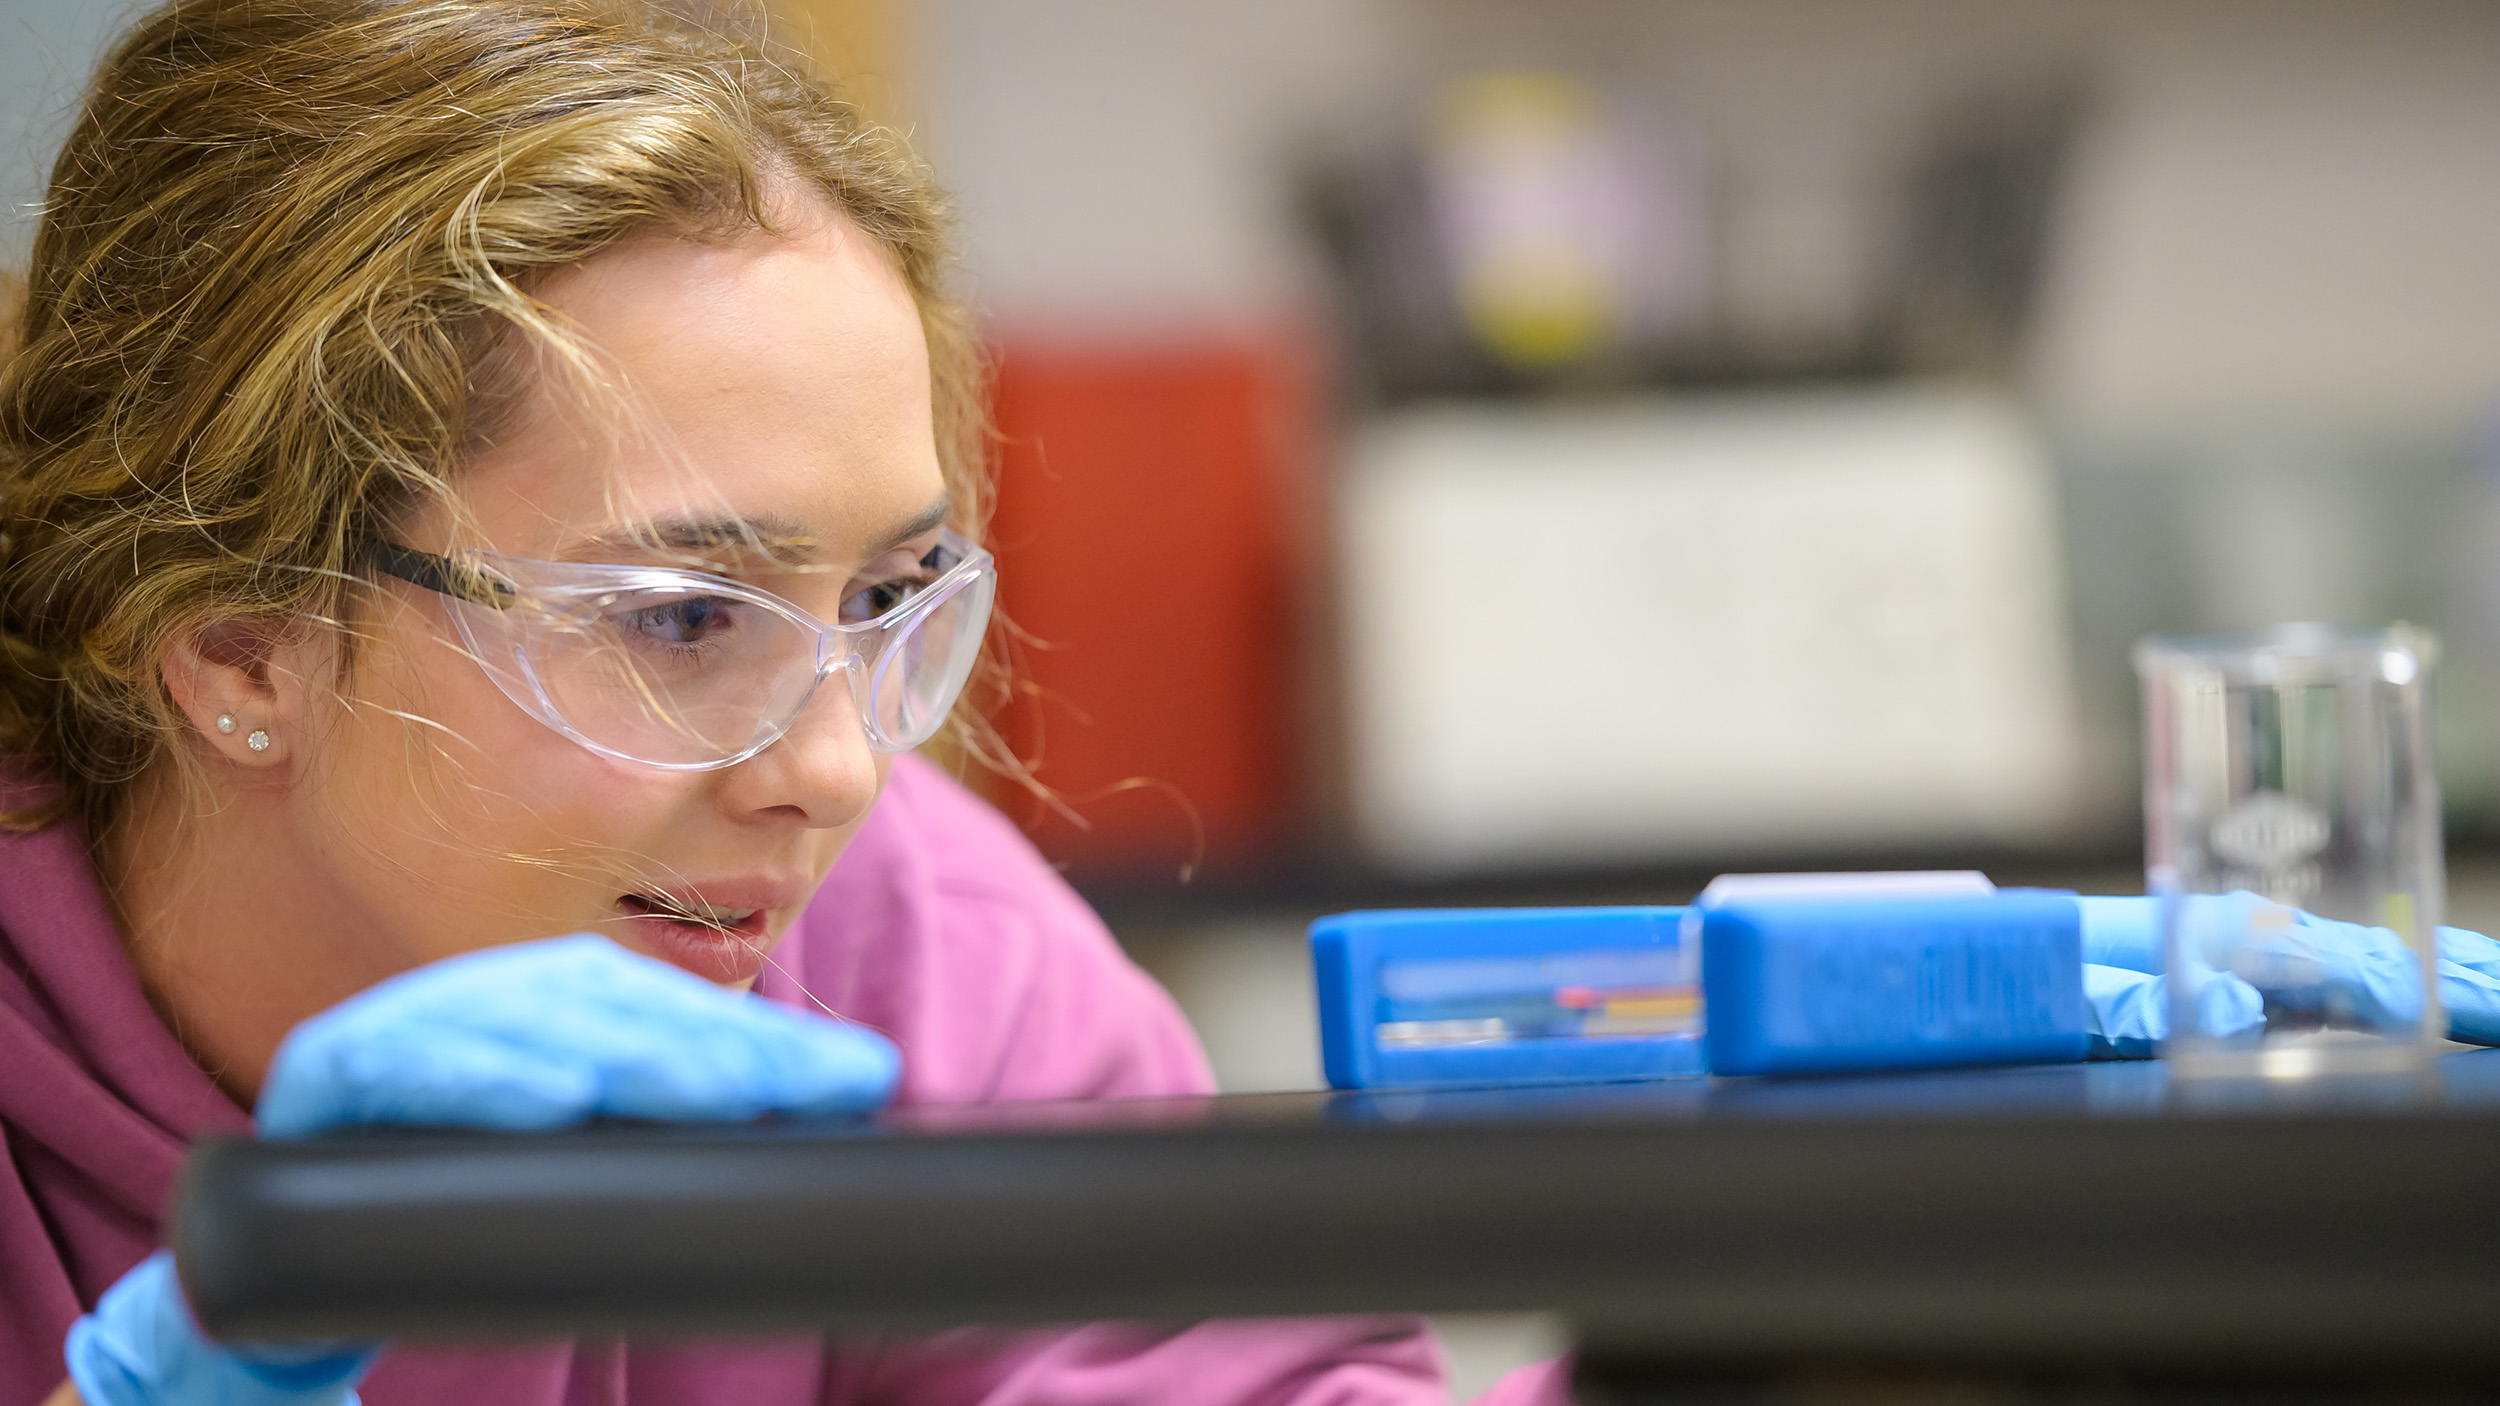 Colorado school of mines student working in a research lab